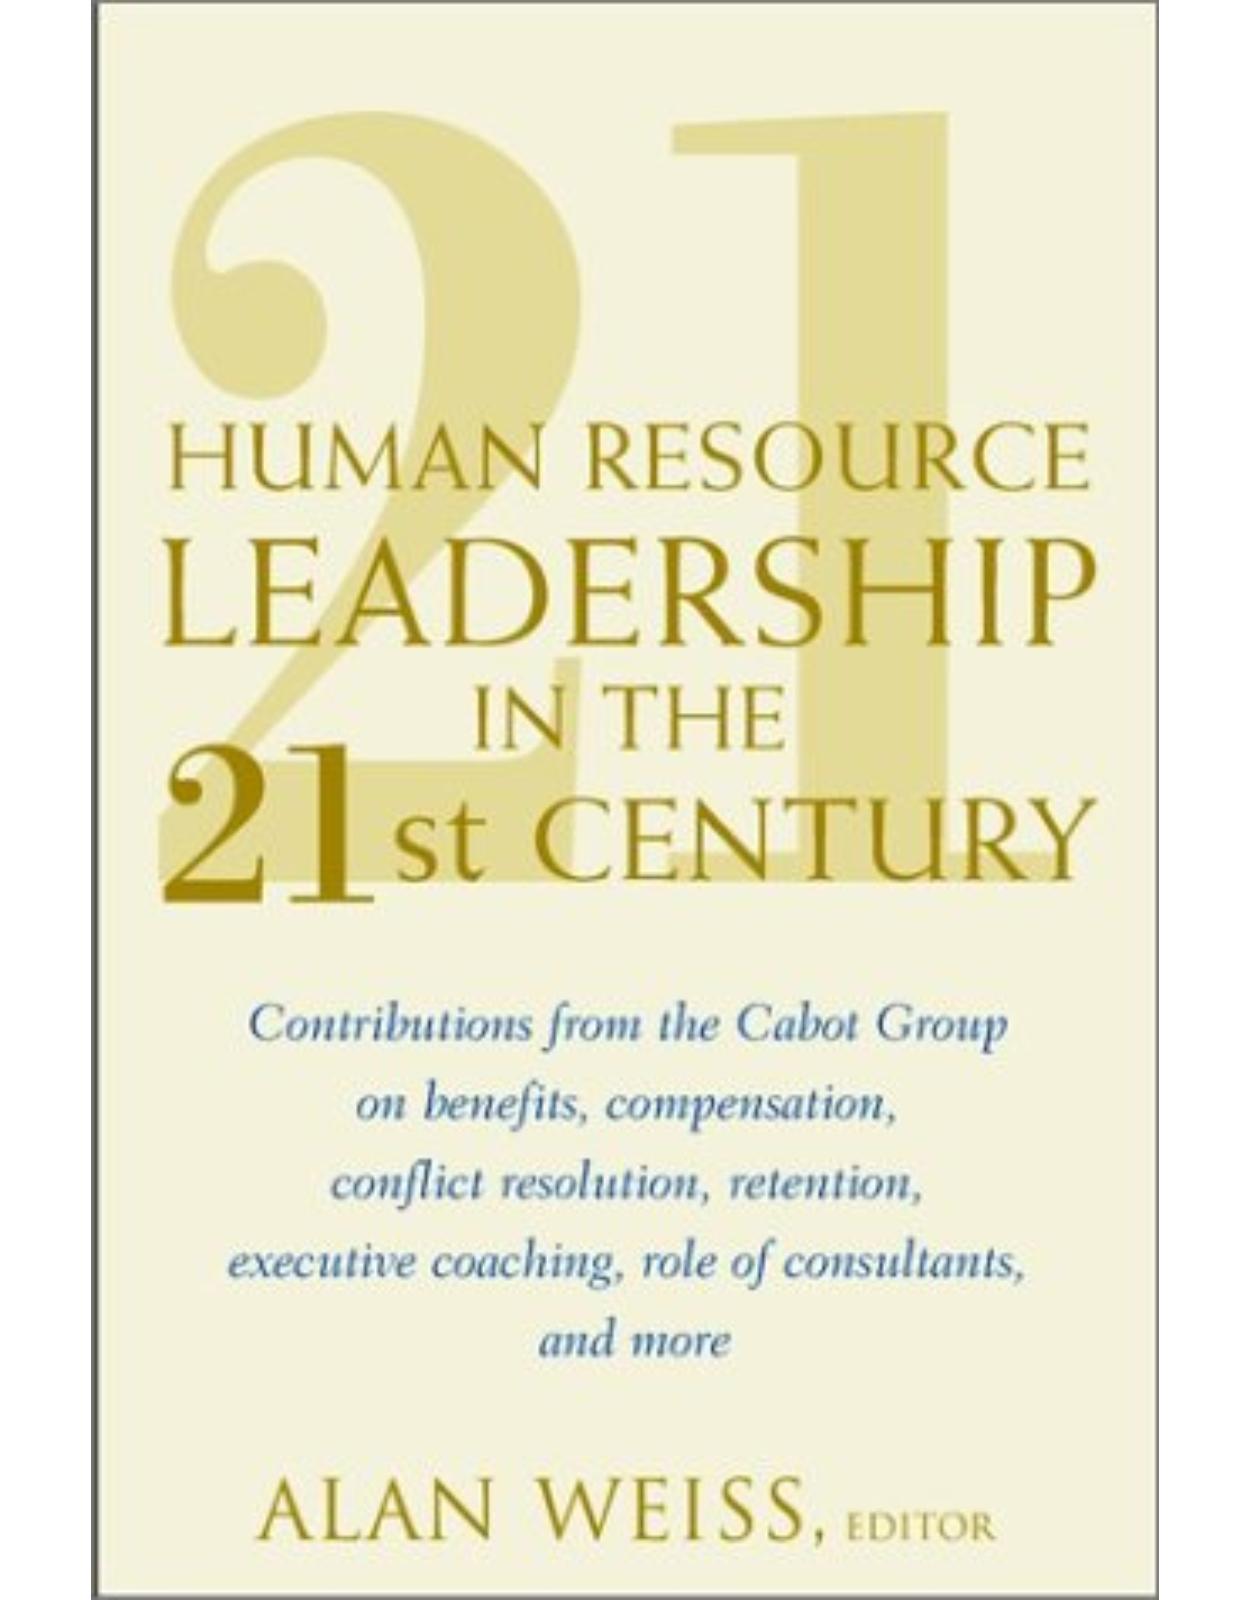 Human Resource Leadership in the 21st Century